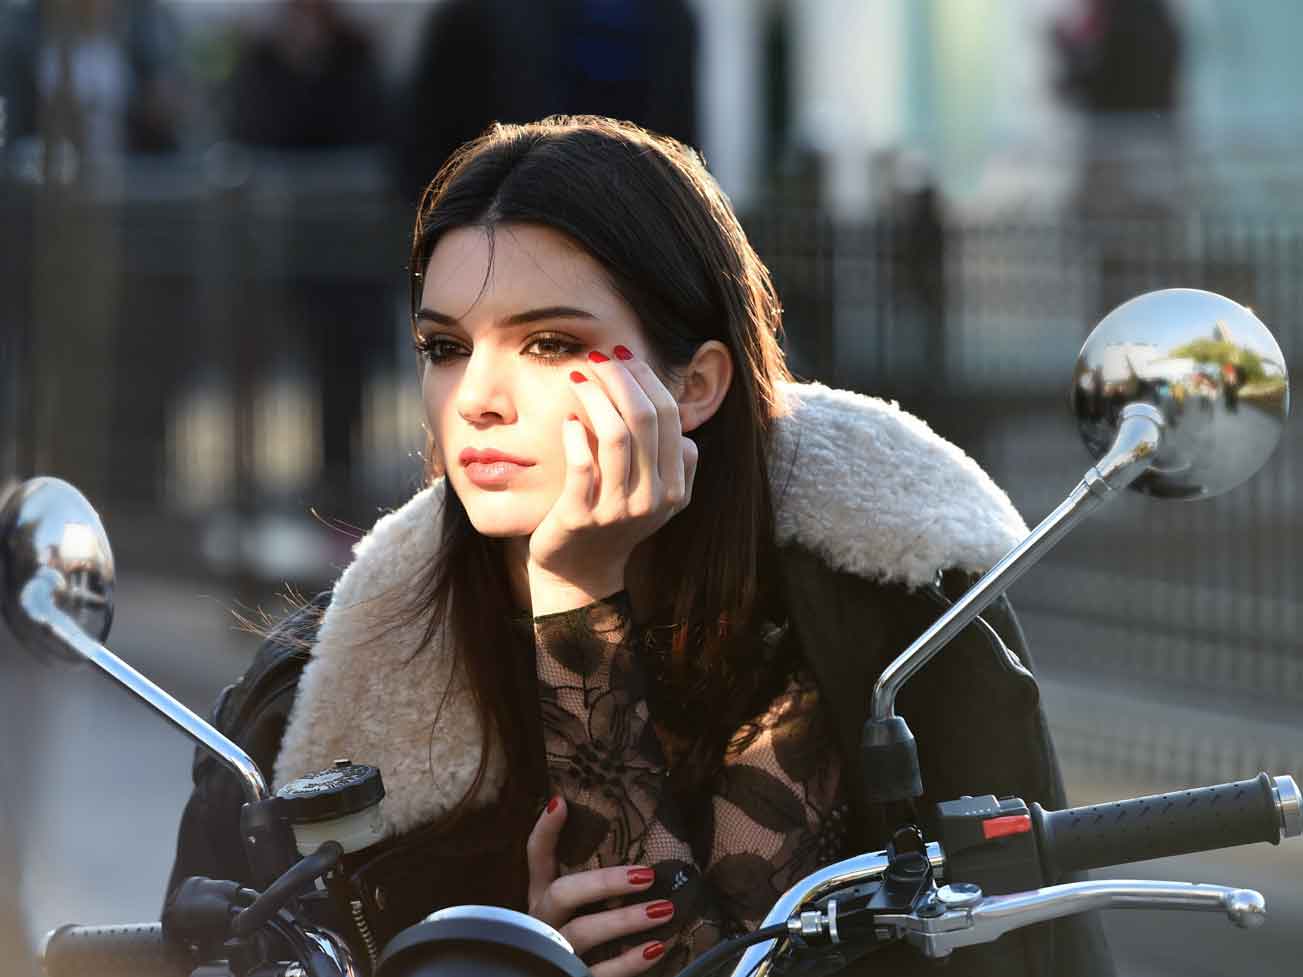 Behind the scenes of Kendall Jenner for Estee Lauder